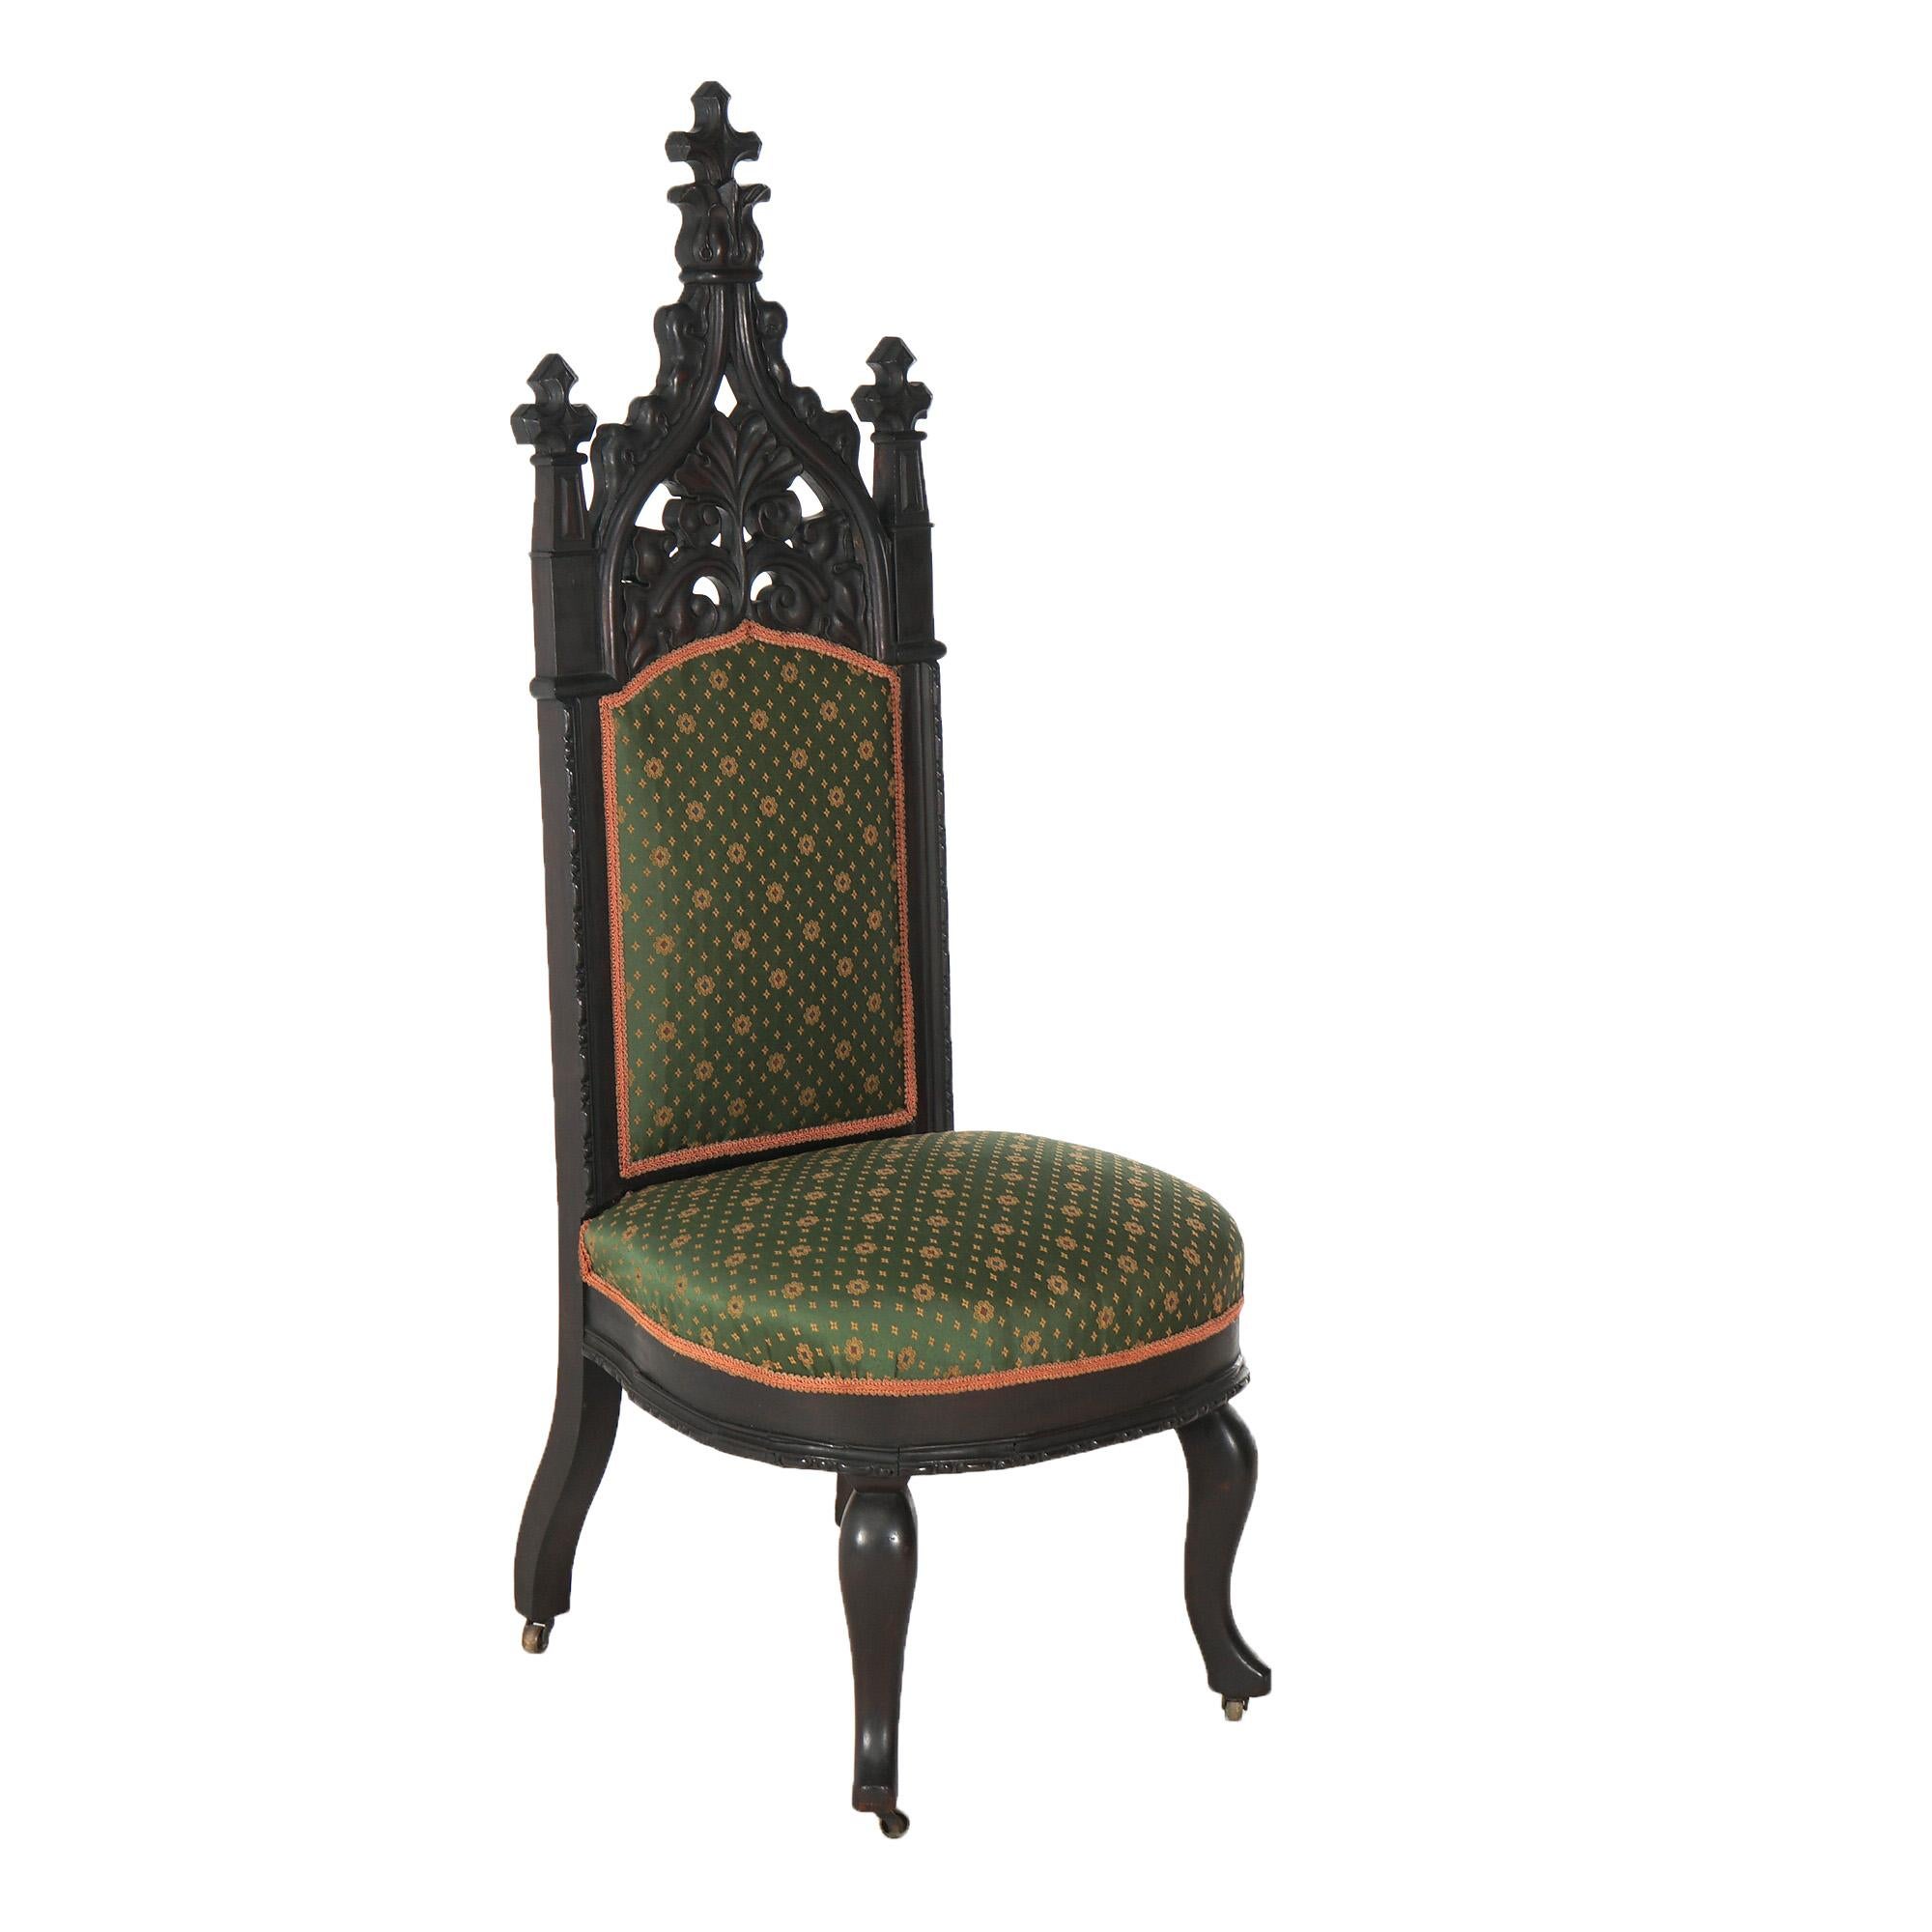 Antique Gothic Revival Ebonized & Carved Walnut Upholstered Throne Chair C1860 For Sale 4